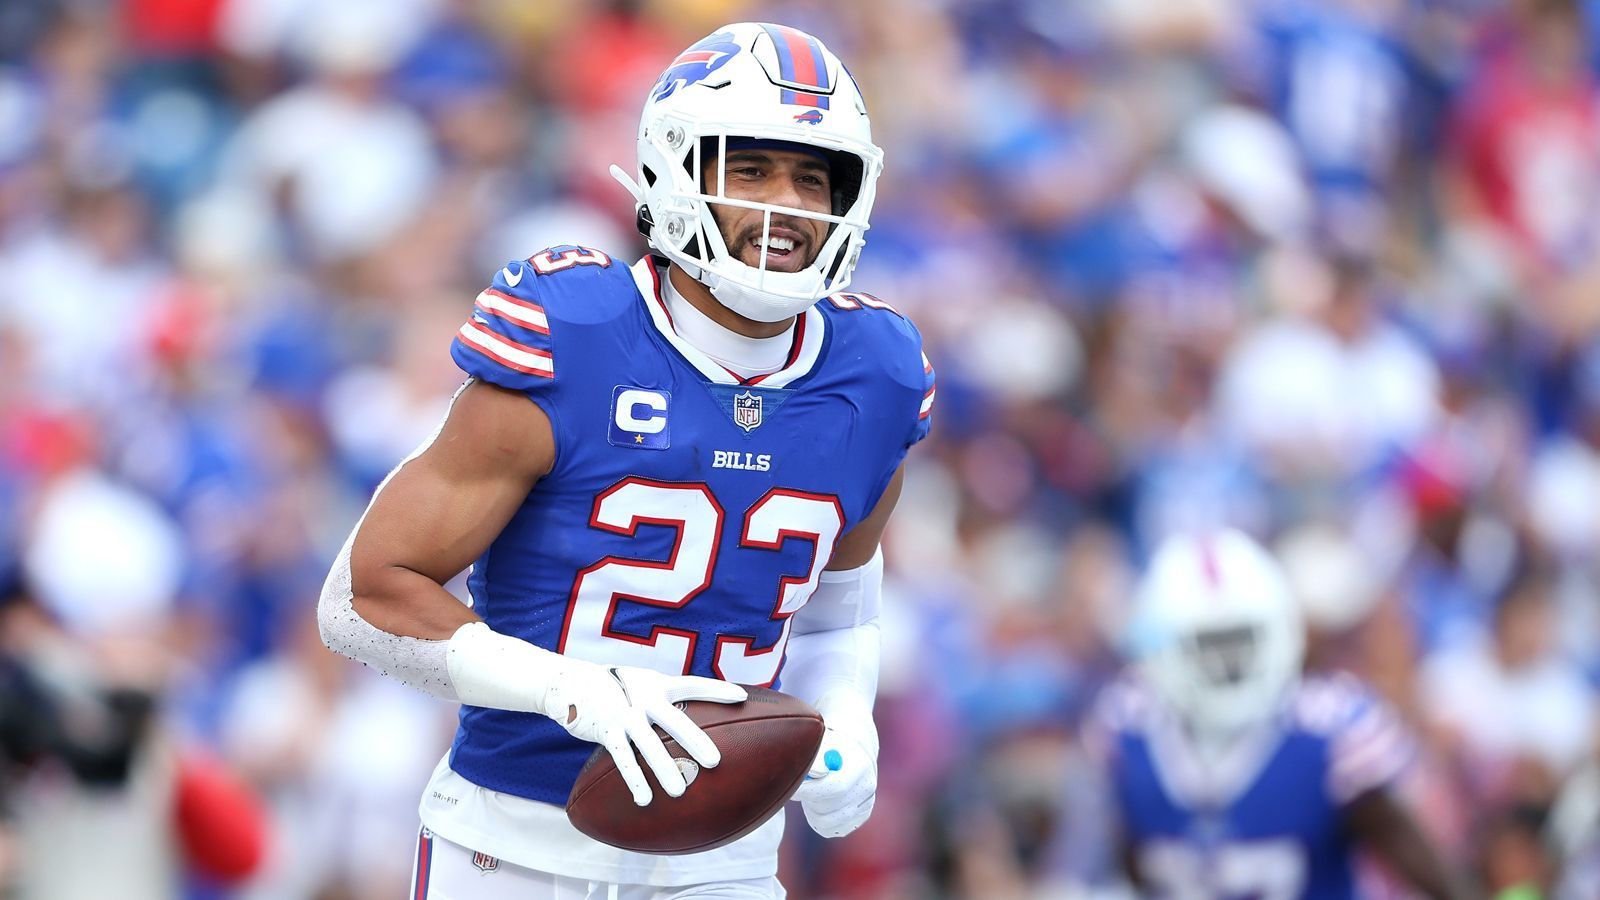 
                <strong>Platz 5 (geteilt): Micah Hyde</strong><br>
                &#x2022; Team: Buffalo Bills<br>&#x2022; Position: Free Safety<br>&#x2022; <strong>Overall Rating: 91</strong><br>&#x2022; Beste Key Stats: Awareness: 96 - Stamina: 94 - Play Recognition: 97<br>
              